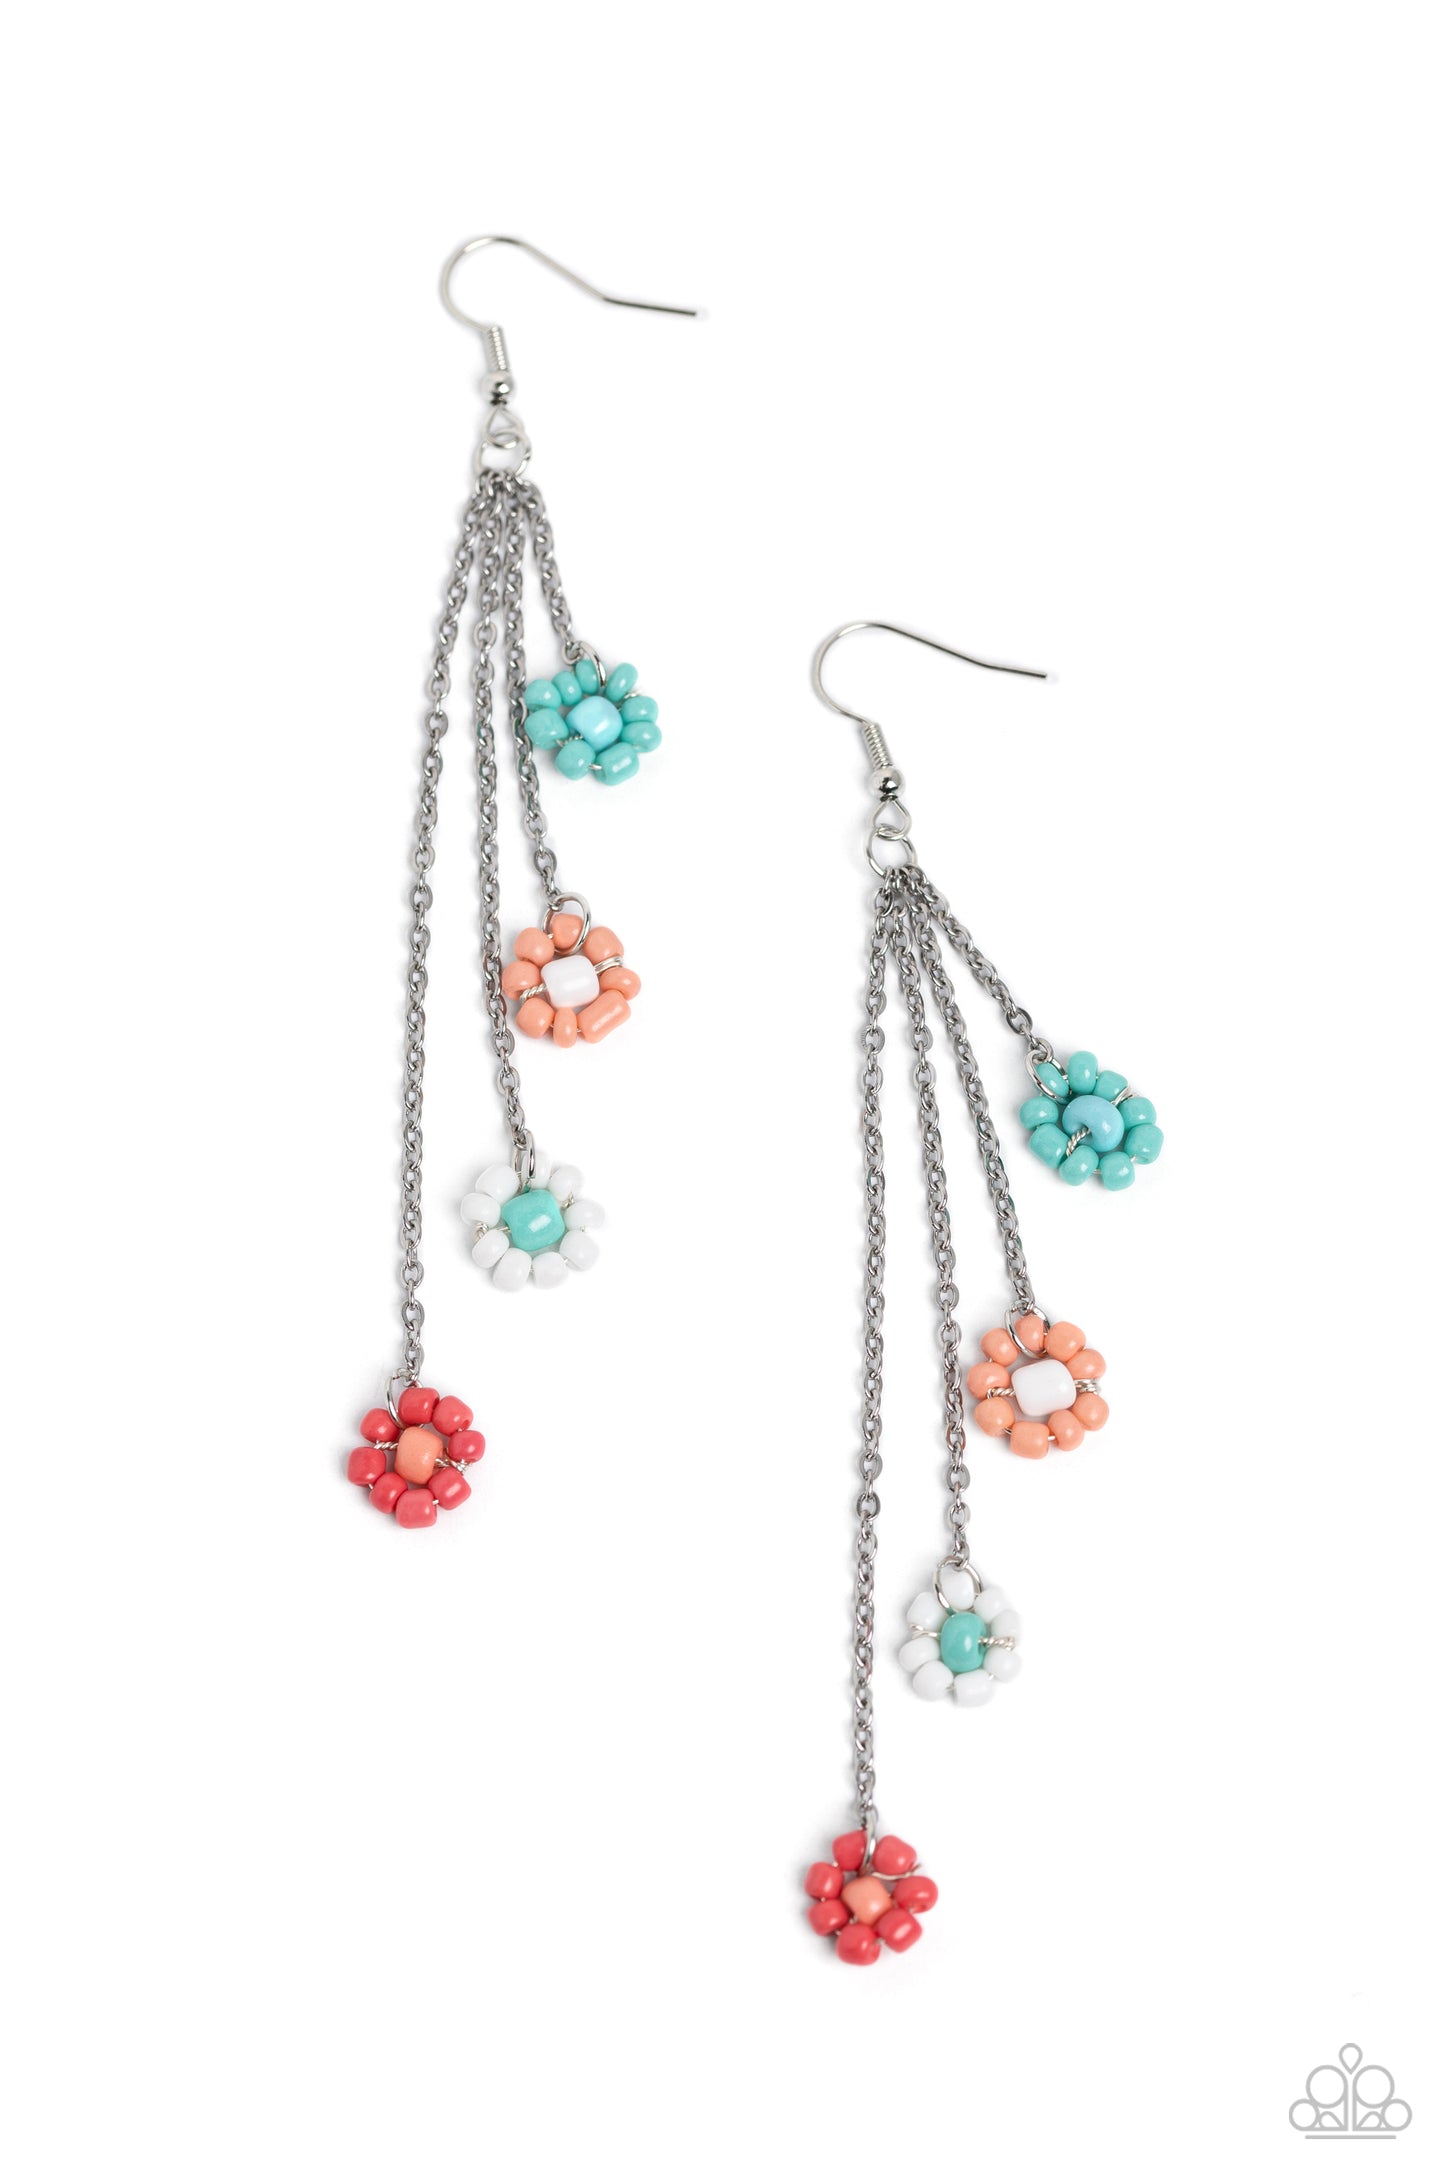 Paparazzi Earring ~ Color Me Whimsical - Multi